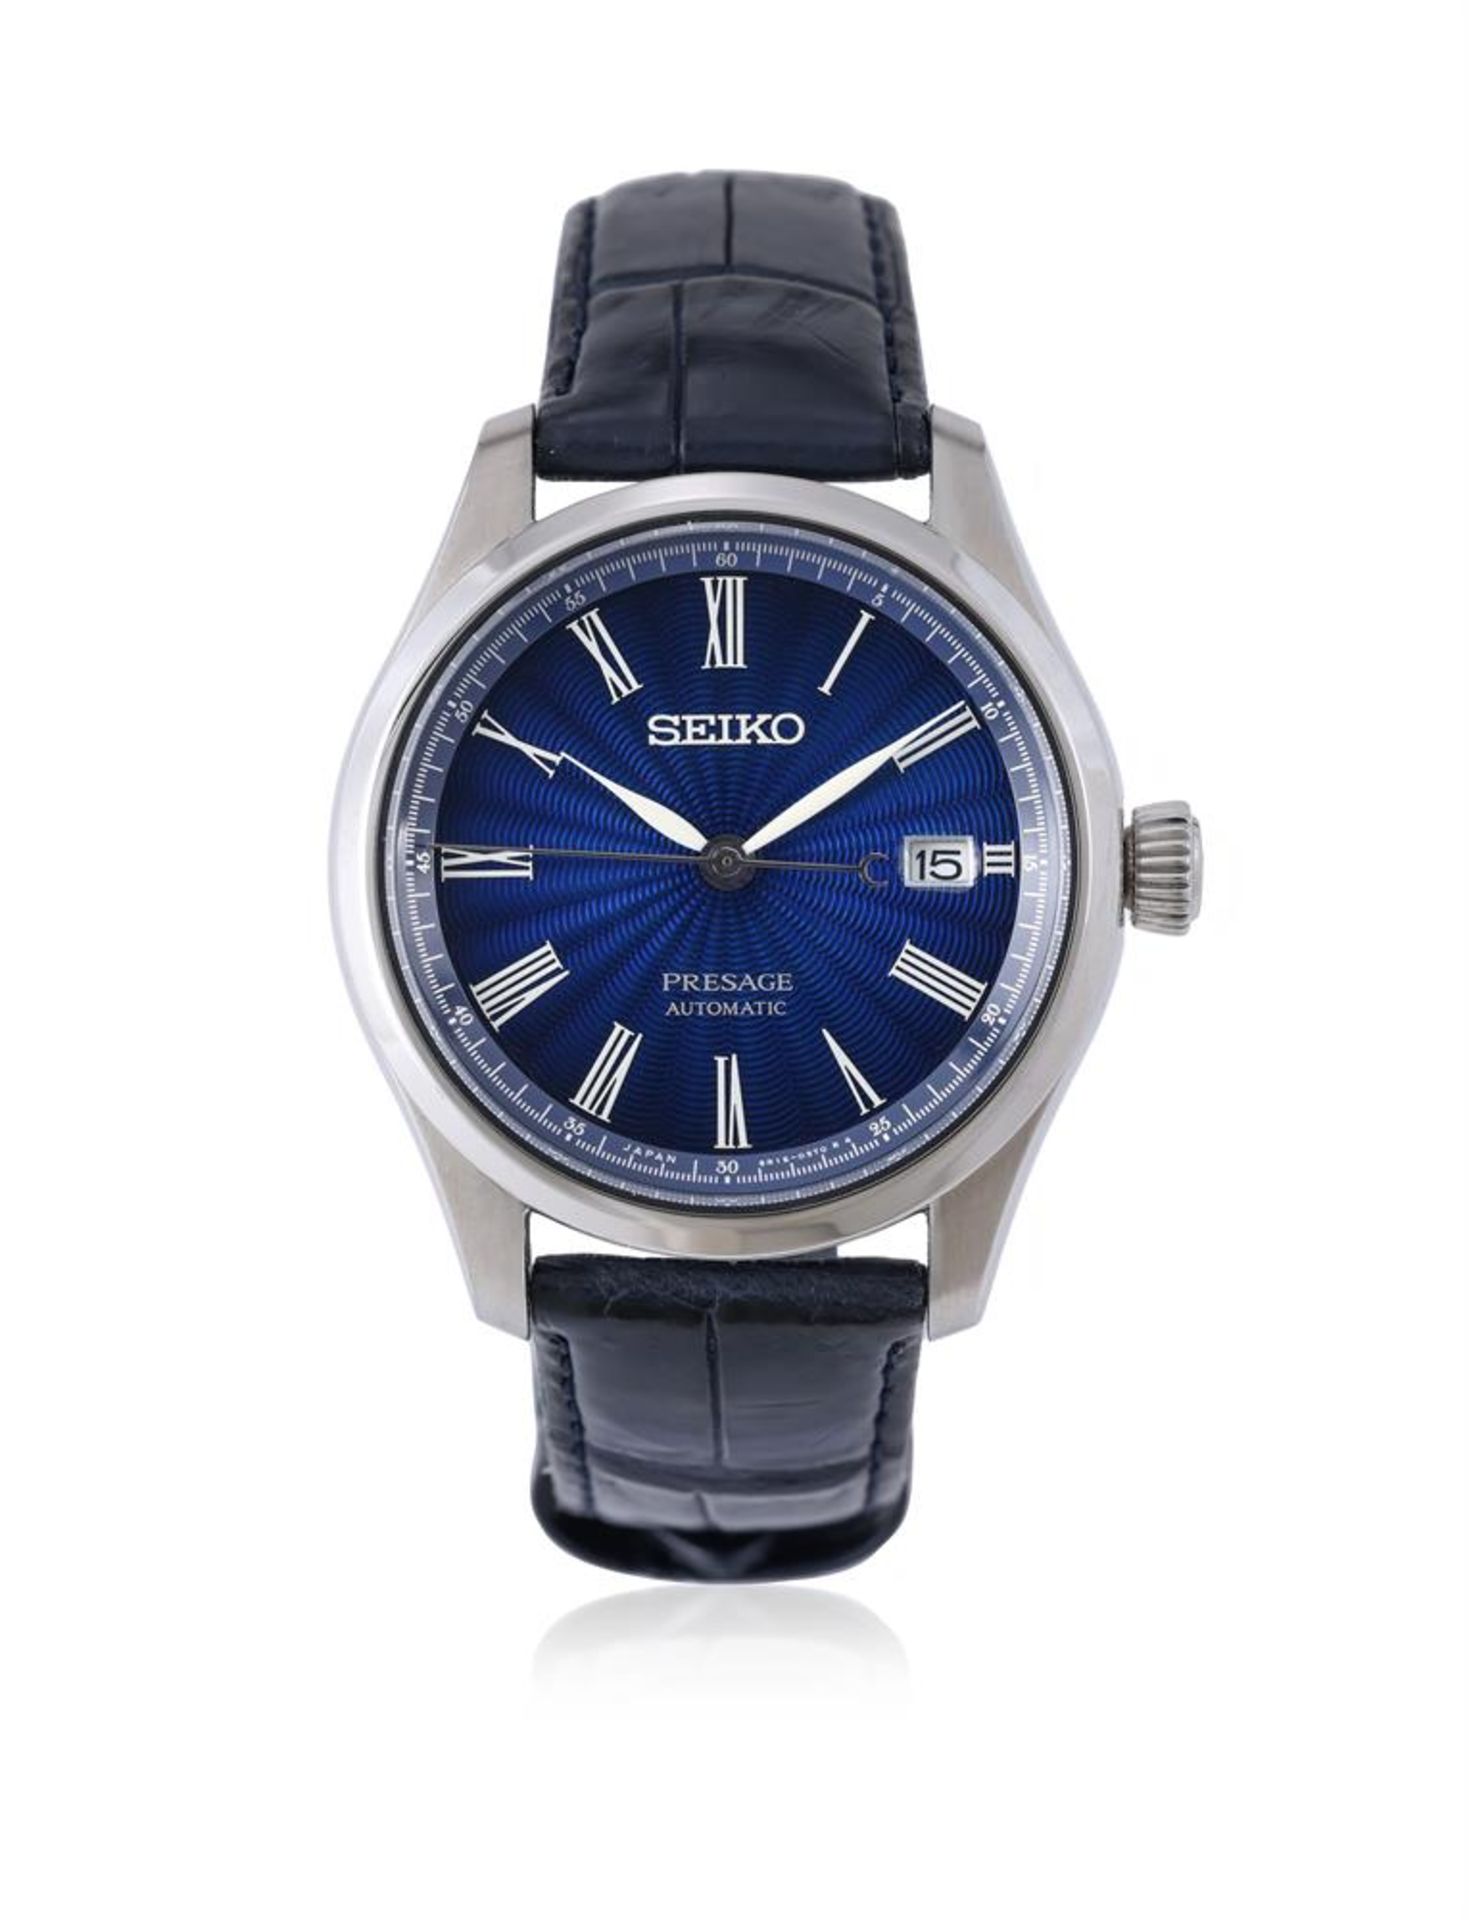 Y SEIKO, PRESAGE SHIPPO, REF. SPB075J1, A LIMITED EDITION STAINLESS STEEL WRISTWATCH WITH DATE